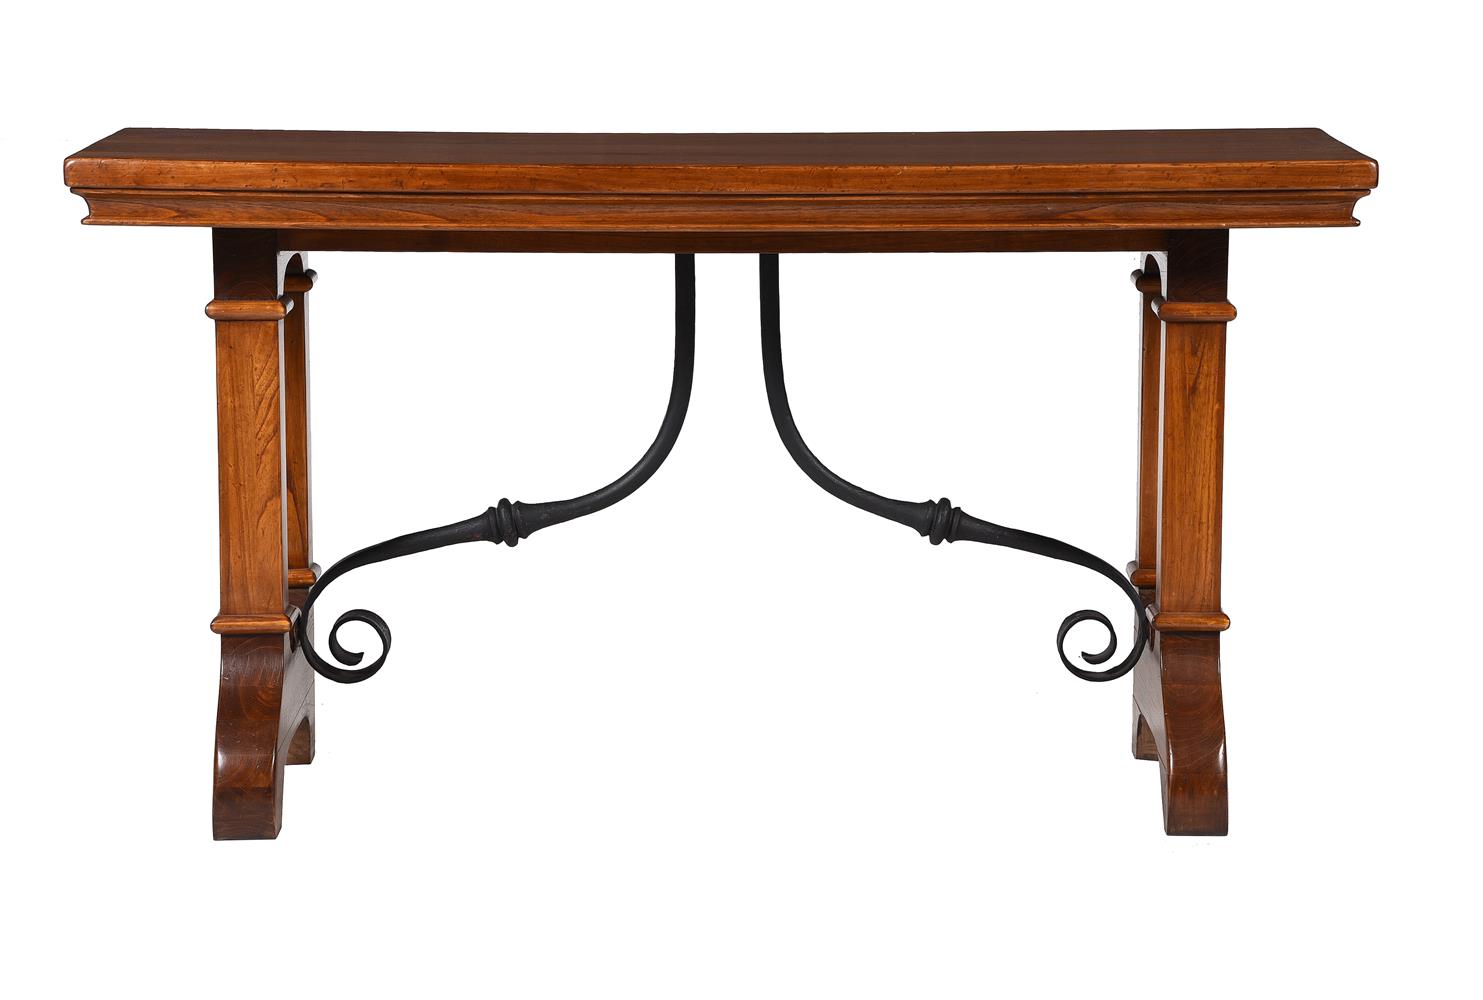 A WALNUT AND WROUGHT IRON SIDE TABLE